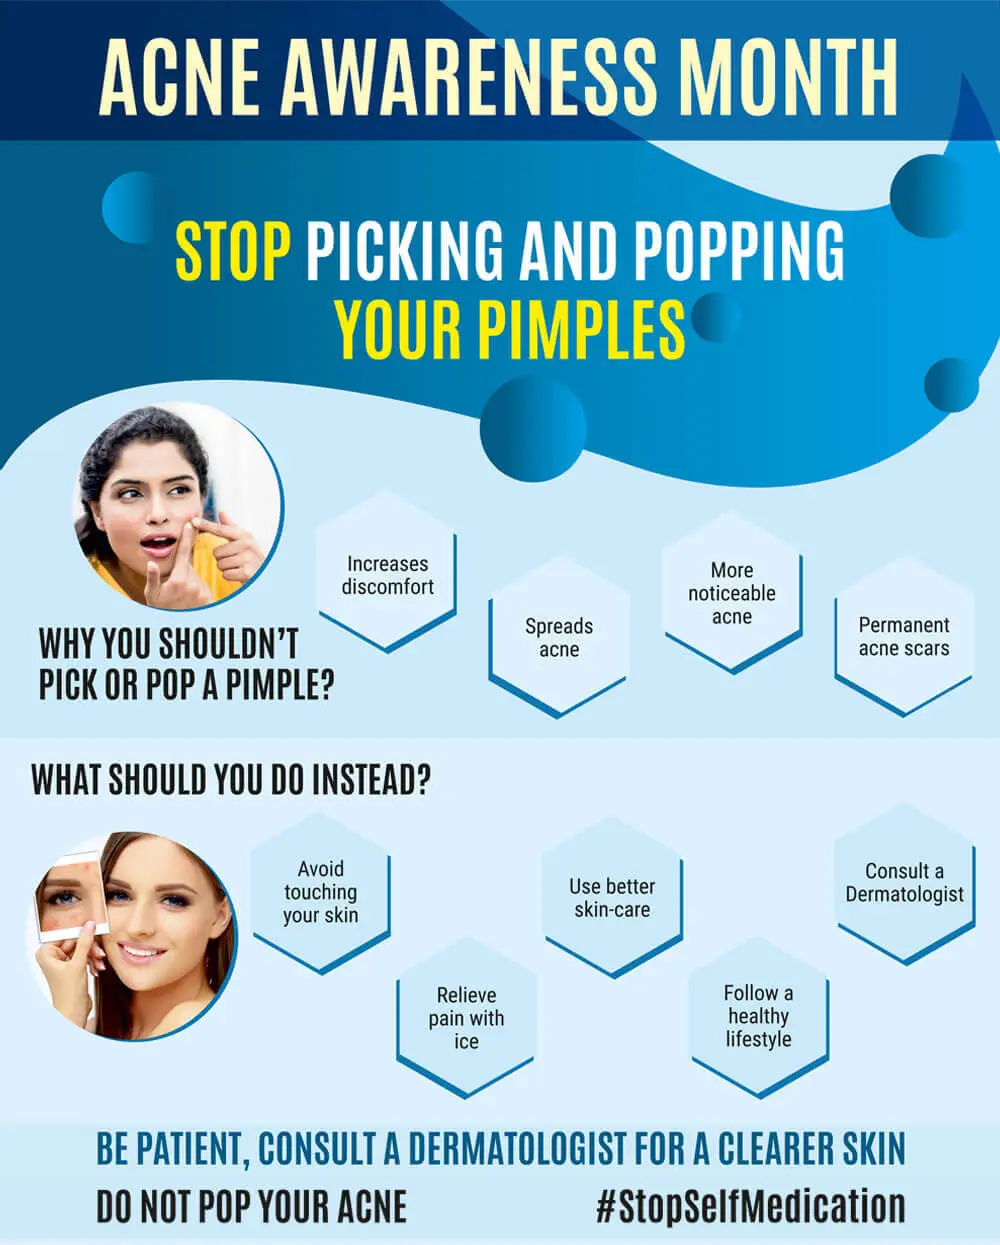 HOW TO TREAT PIMPLES?